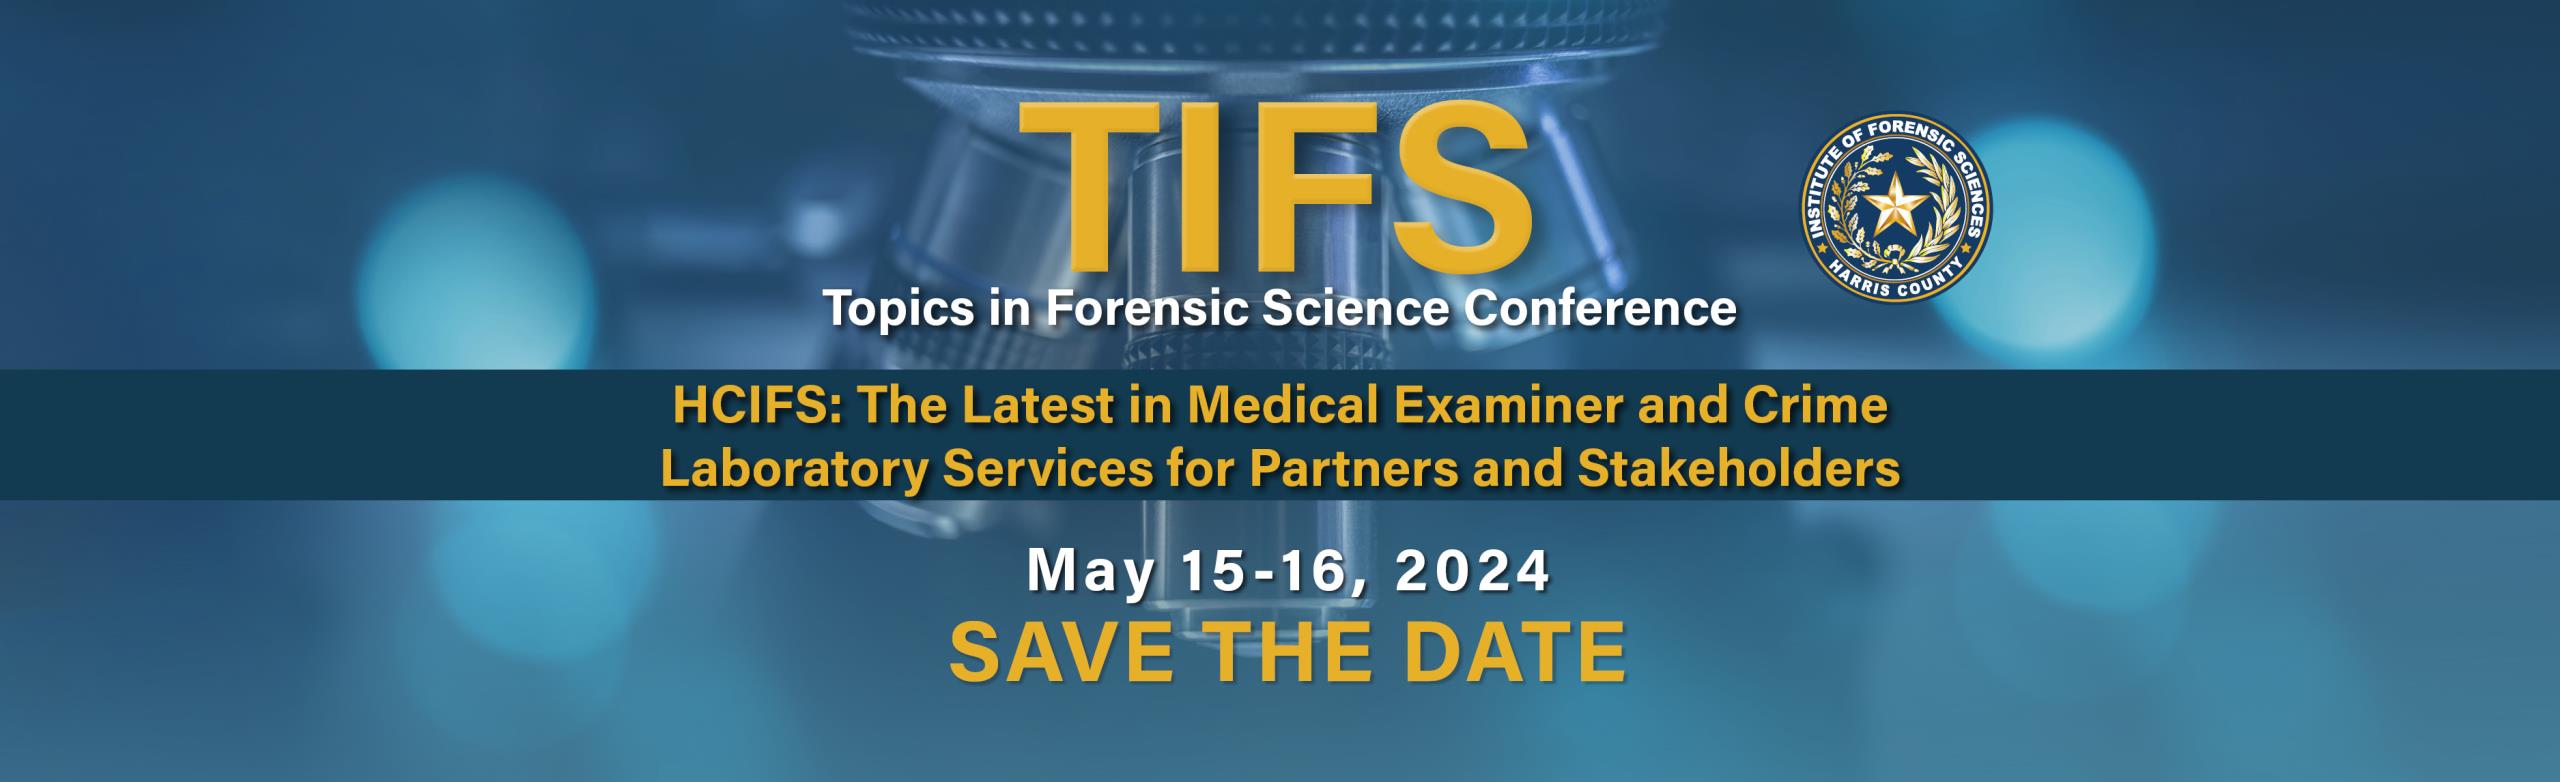 TIFS_2024_Promo_Save The Date_Banner